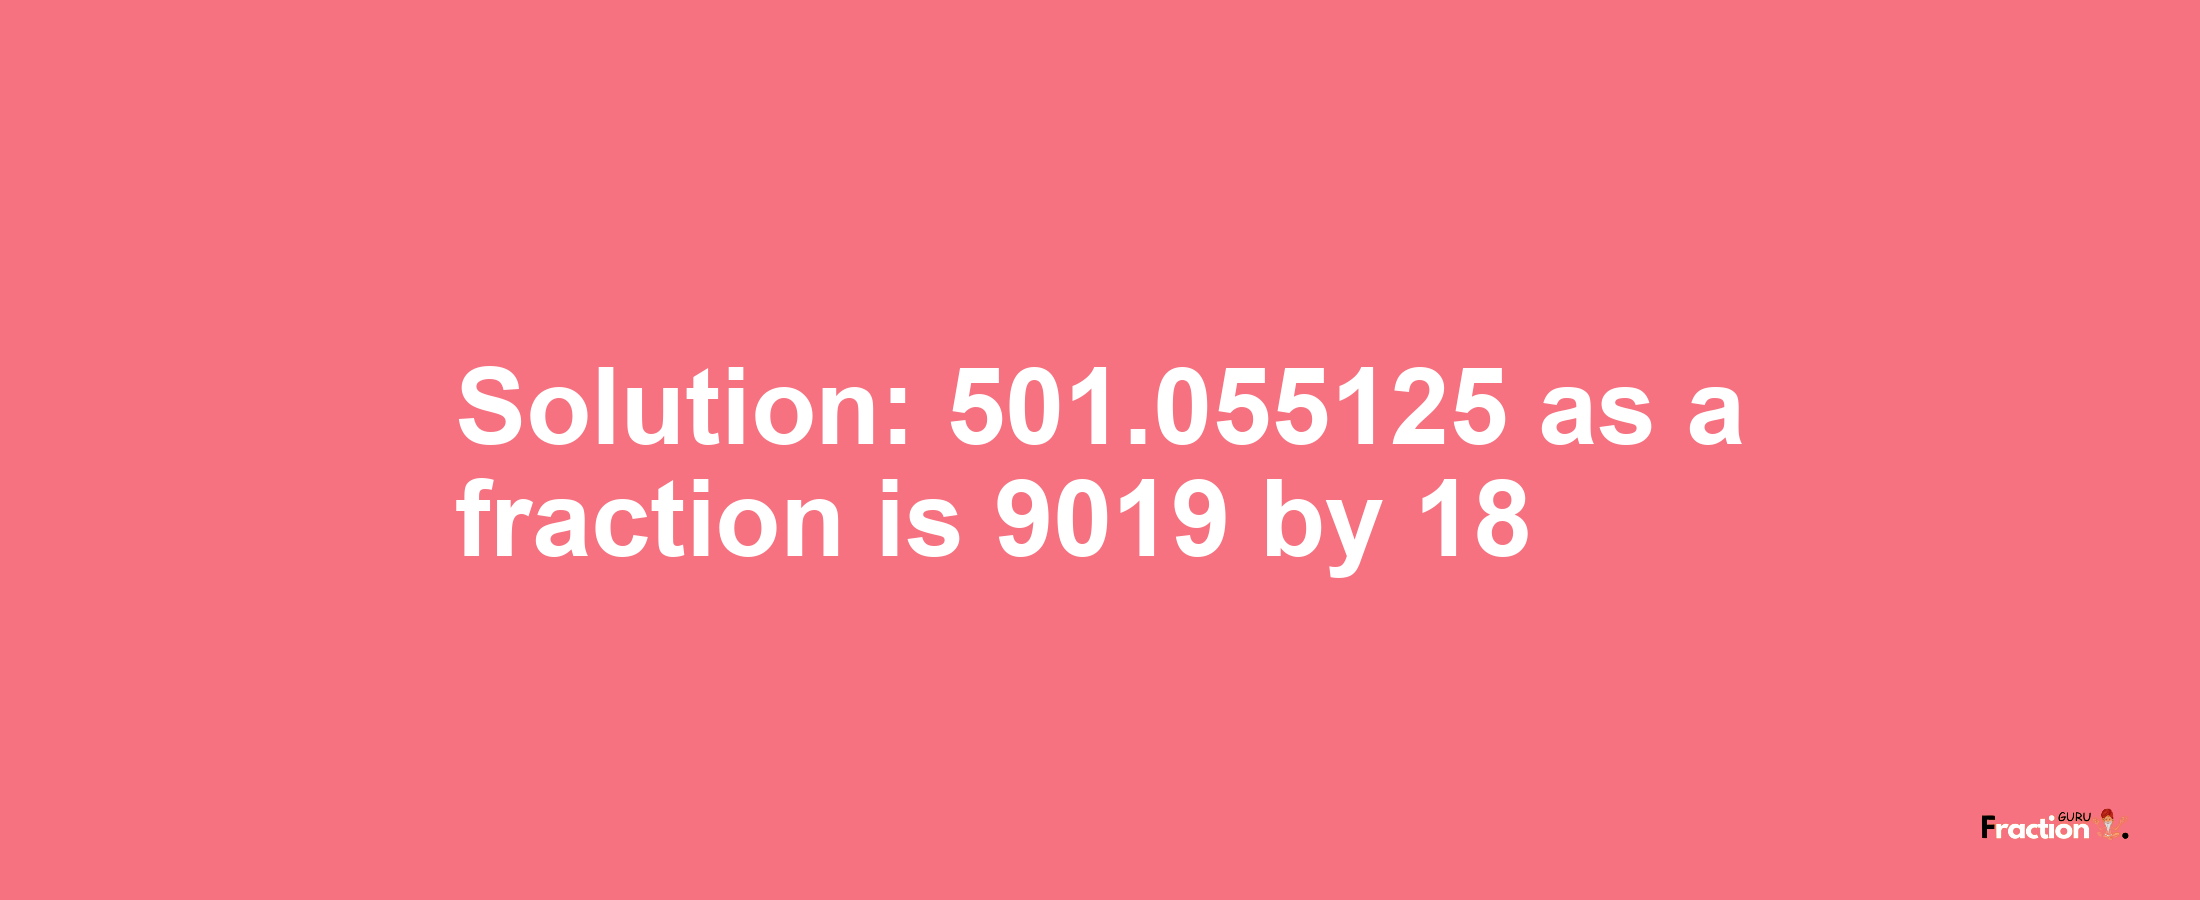 Solution:501.055125 as a fraction is 9019/18